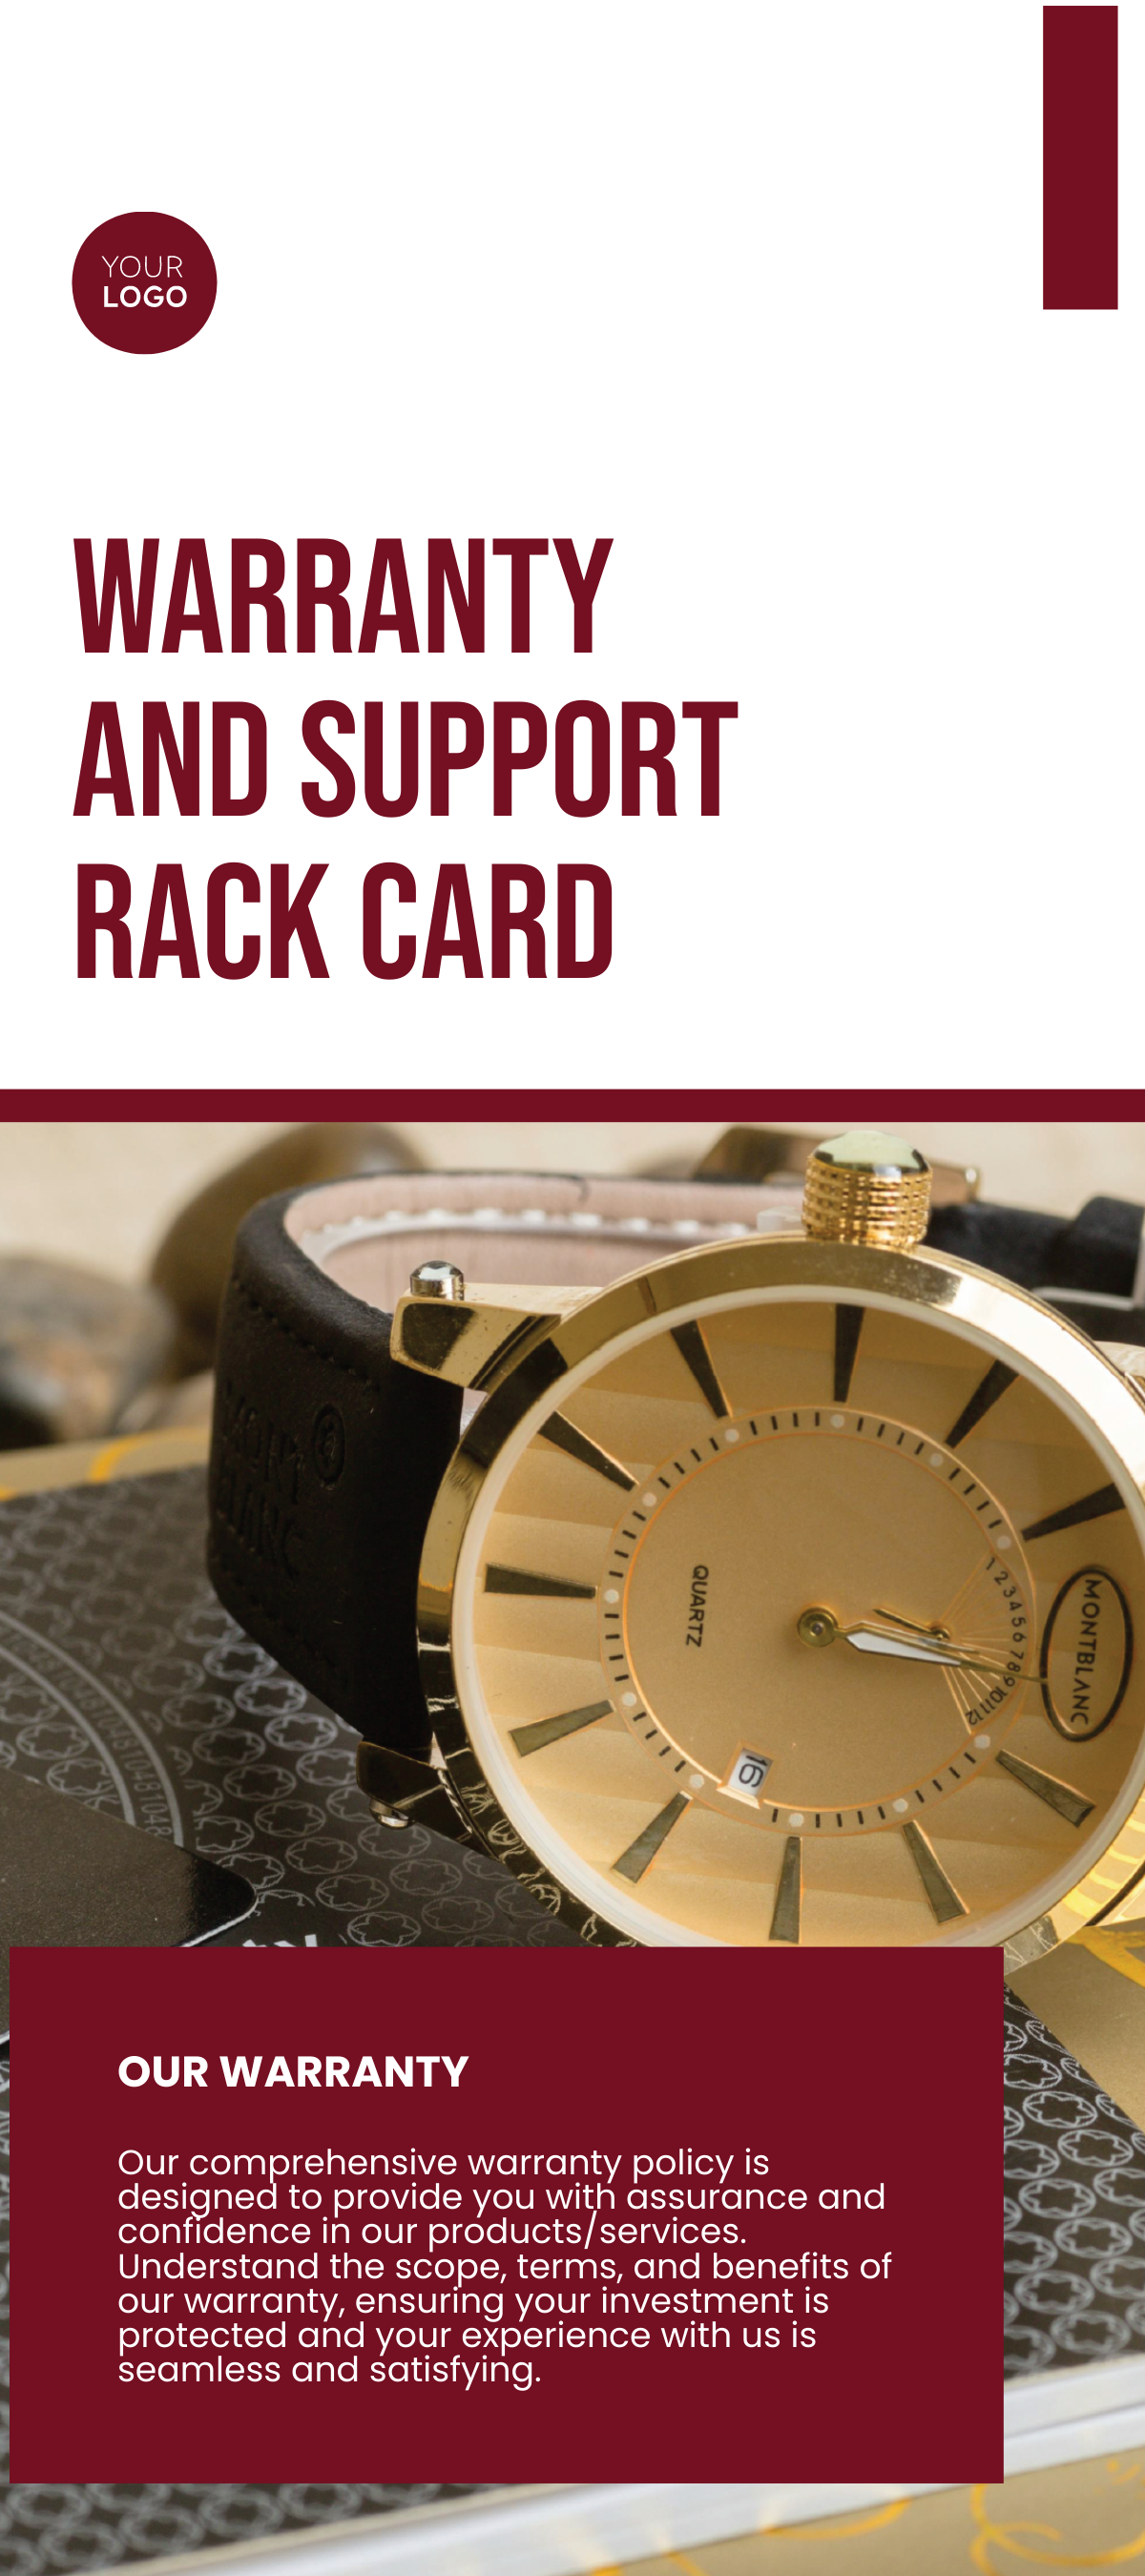 Warranty and Support Rack Card Template